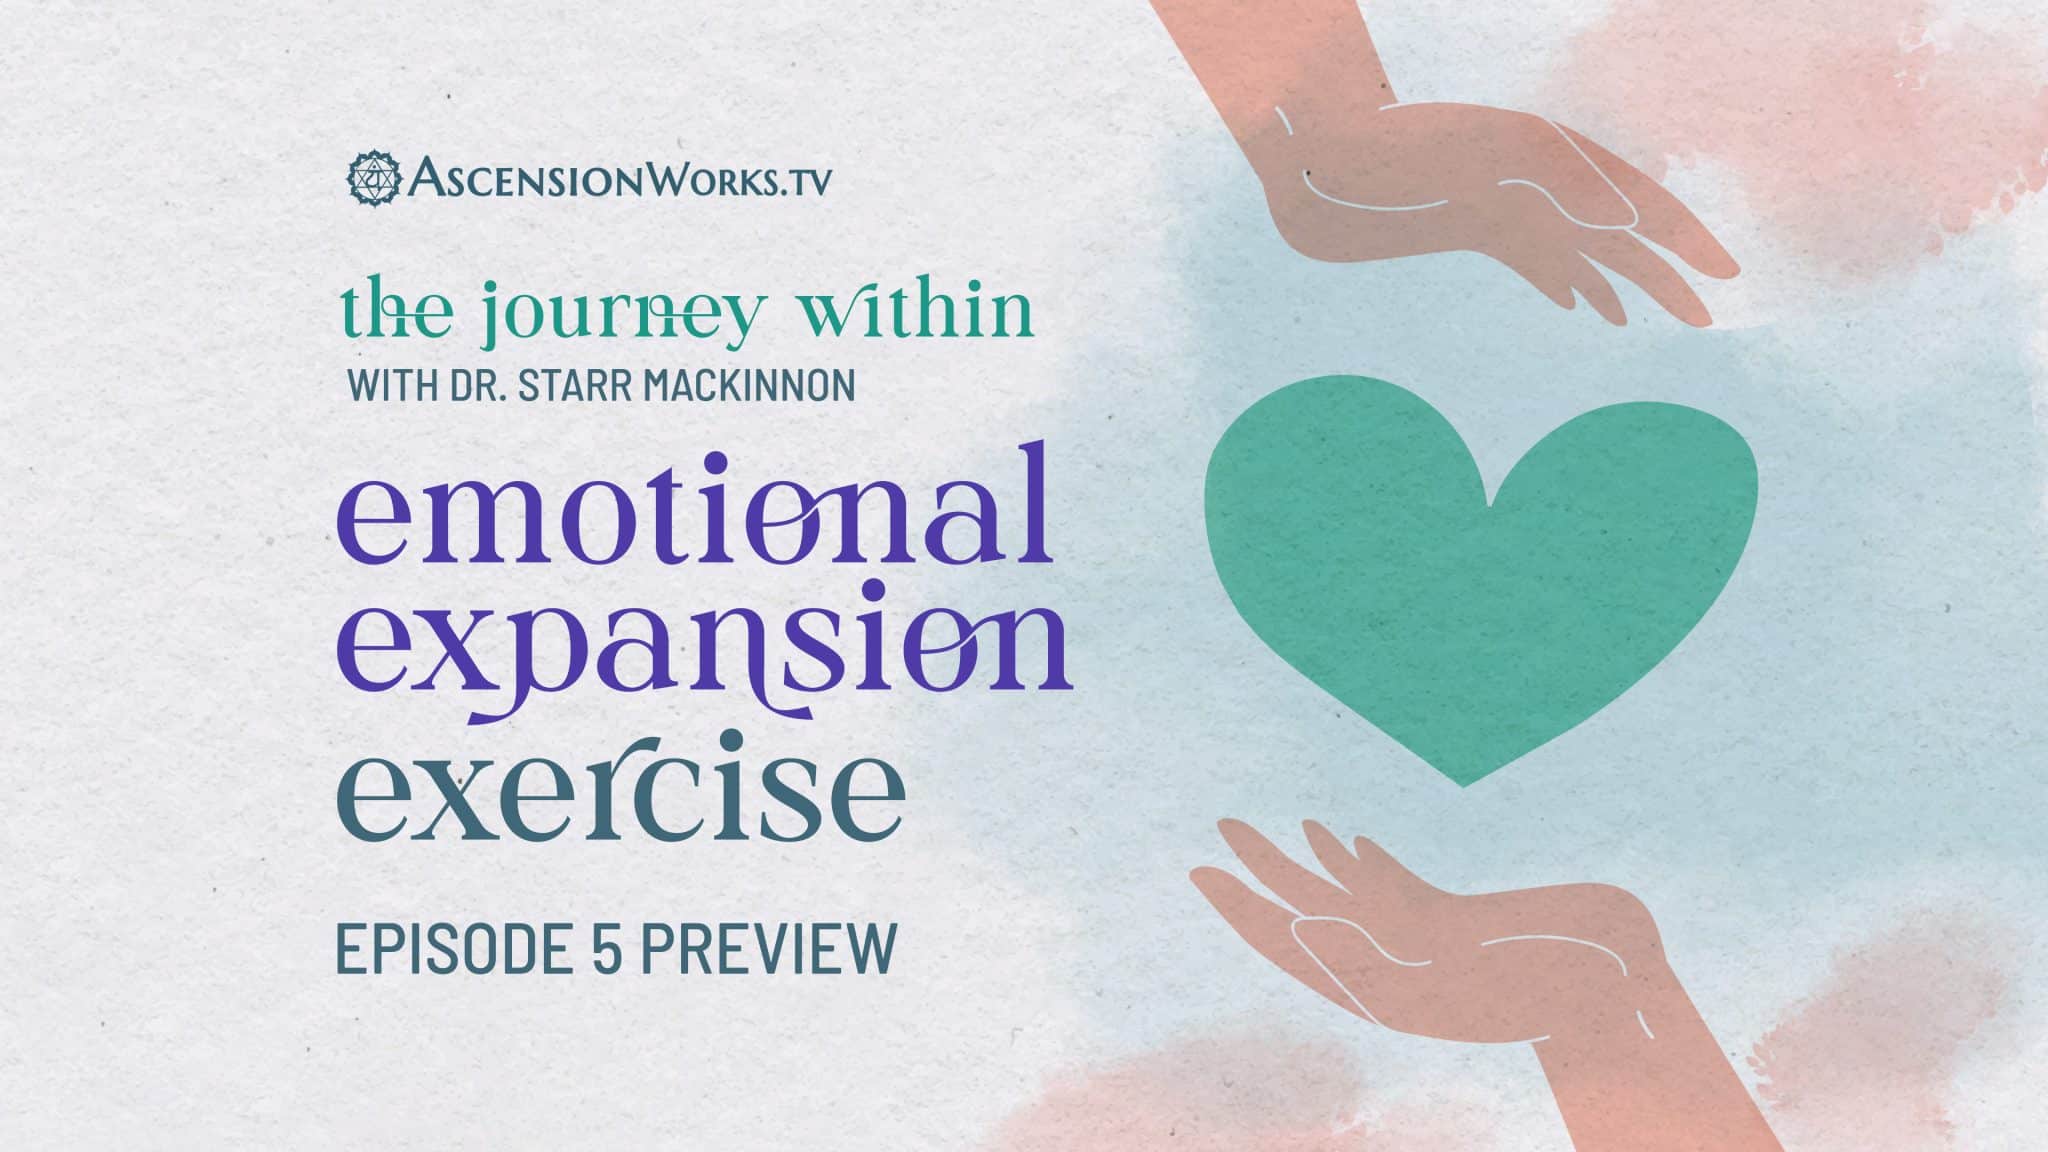 The Journey Within with Dr. Starr - Emotional Expansion Exercise (Episode 5 Preview)